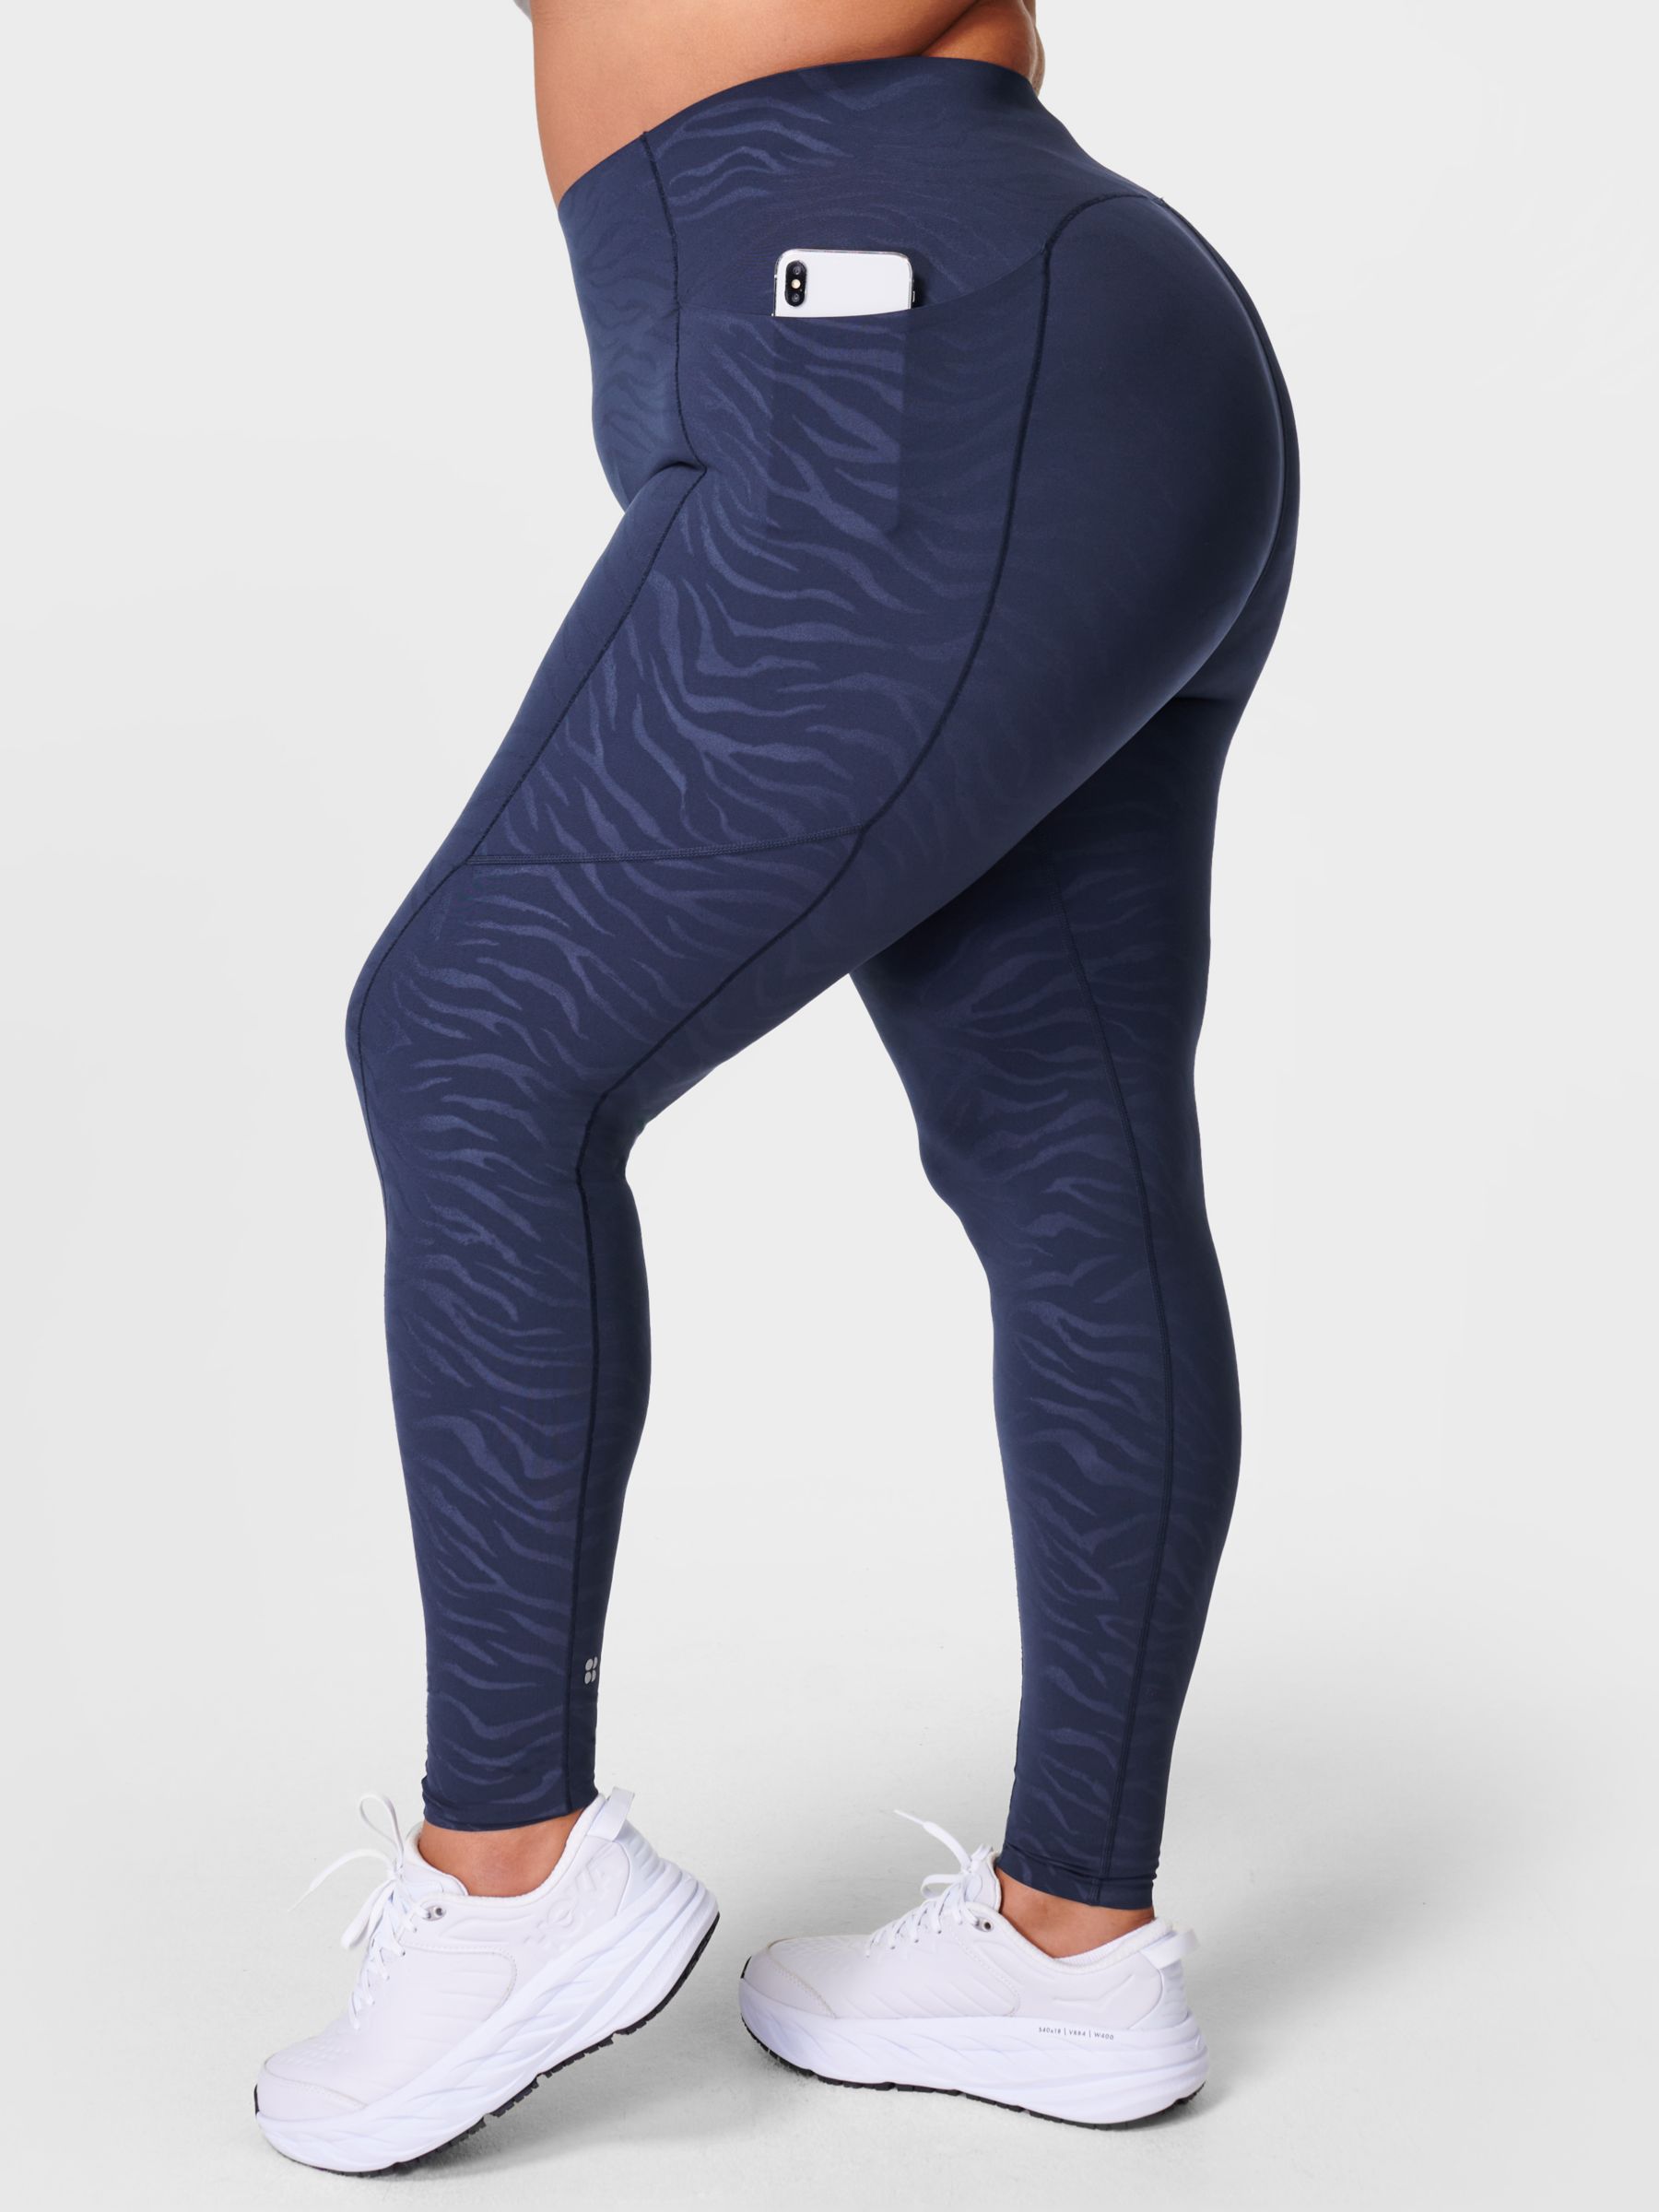 SWEATY BETTY All Day Embossed Leggings in Blue Textured